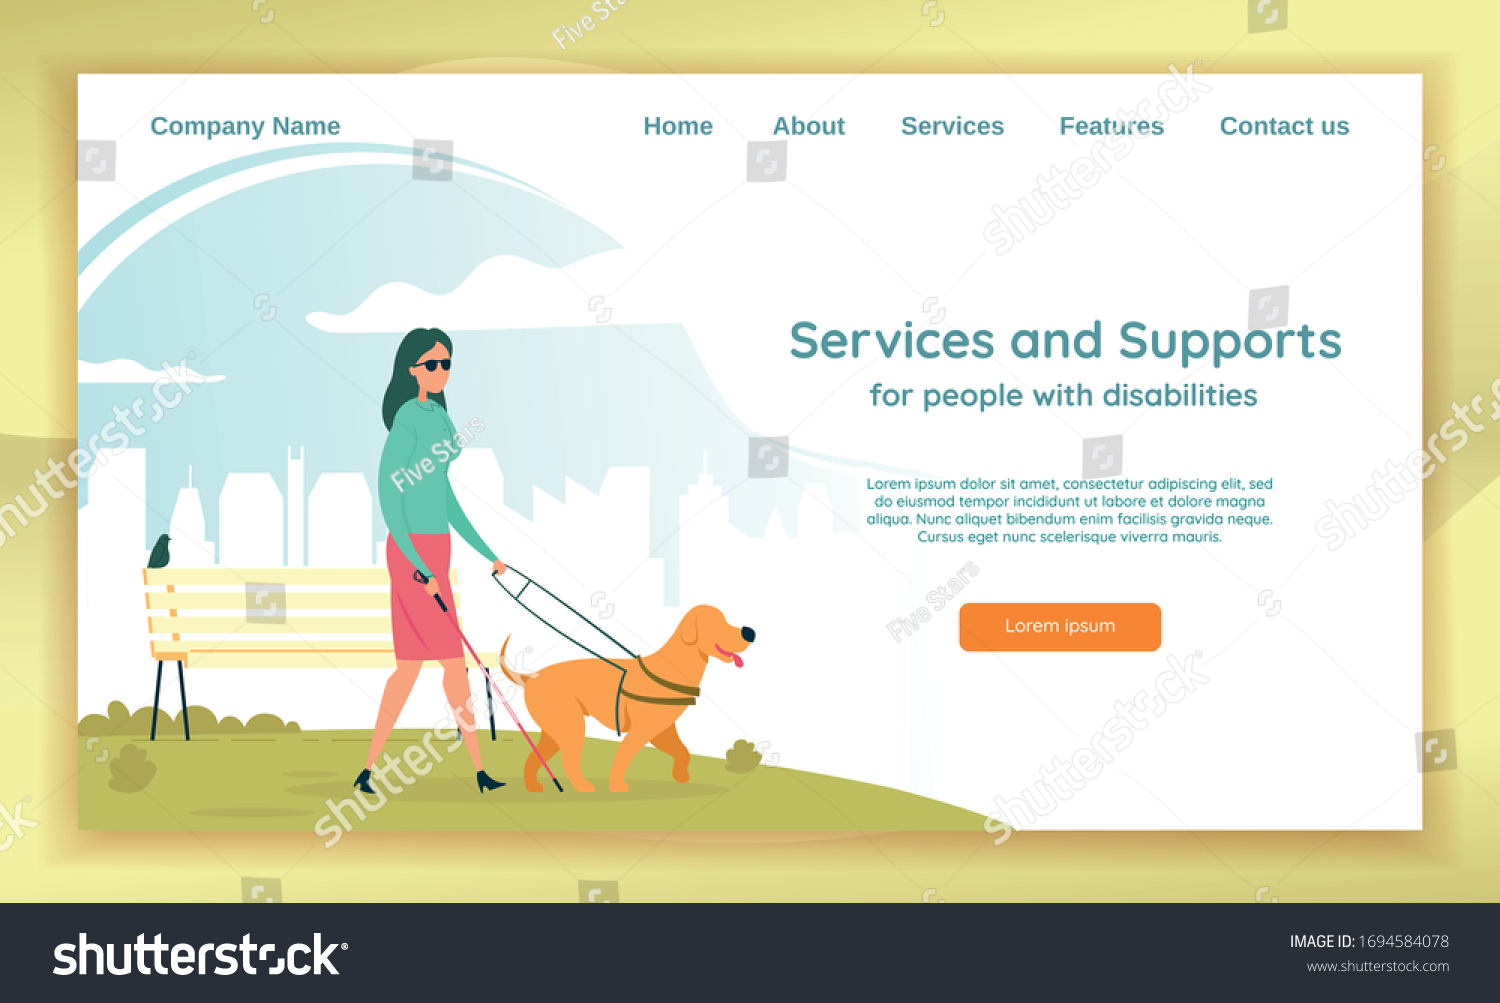 SVG of Sight Challenged Woman Using Long Cane and Guide Dog to Walk Independently. Assistance Pet Trained to Lead Blind Person. Service and Support for People with Disability Banner and Landing Page. svg